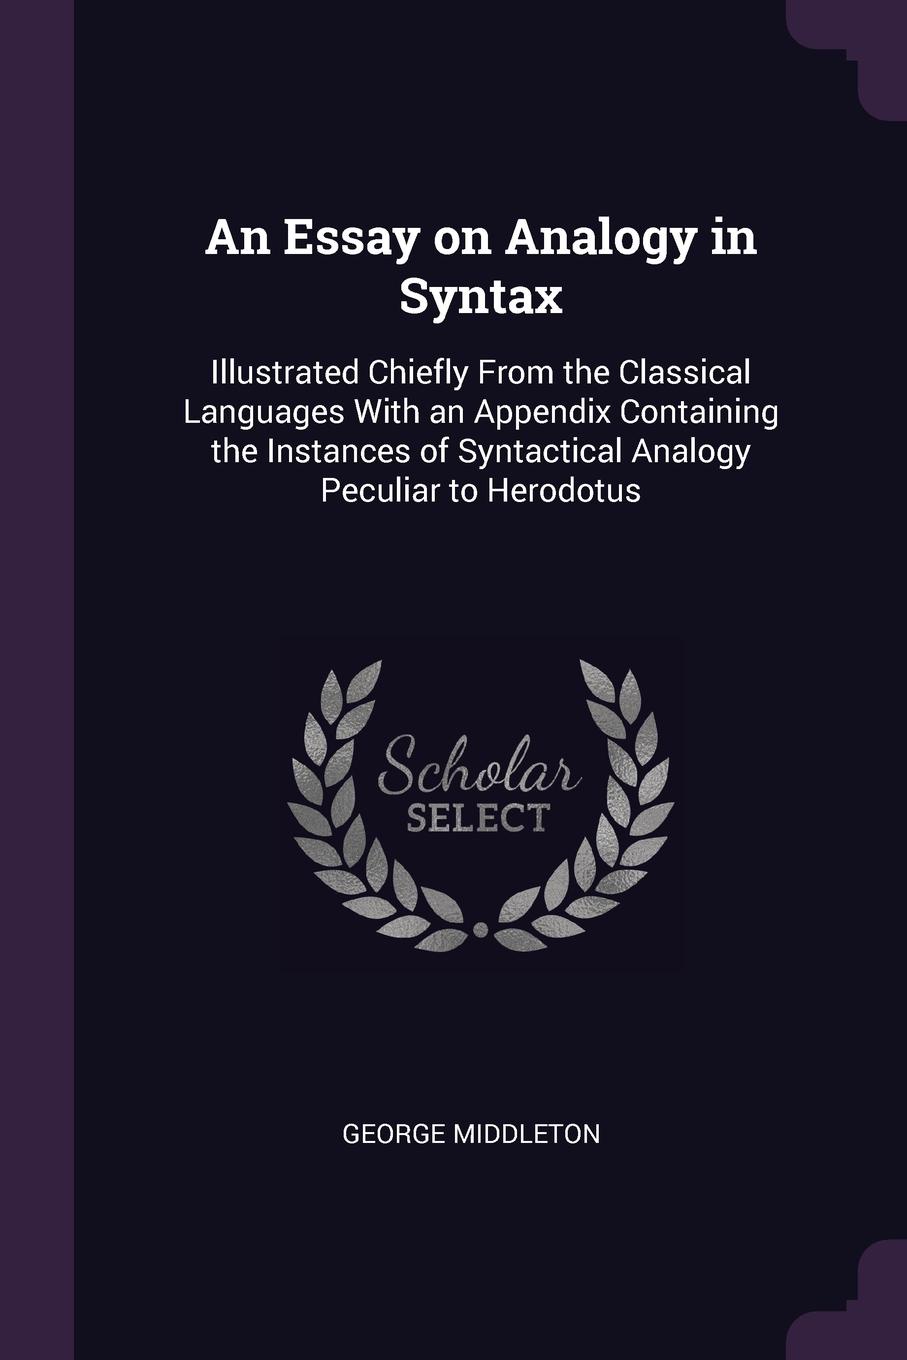 An Essay on Analogy in Syntax. Illustrated Chiefly From the Classical Languages With an Appendix Containing the Instances of Syntactical Analogy Peculiar to Herodotus